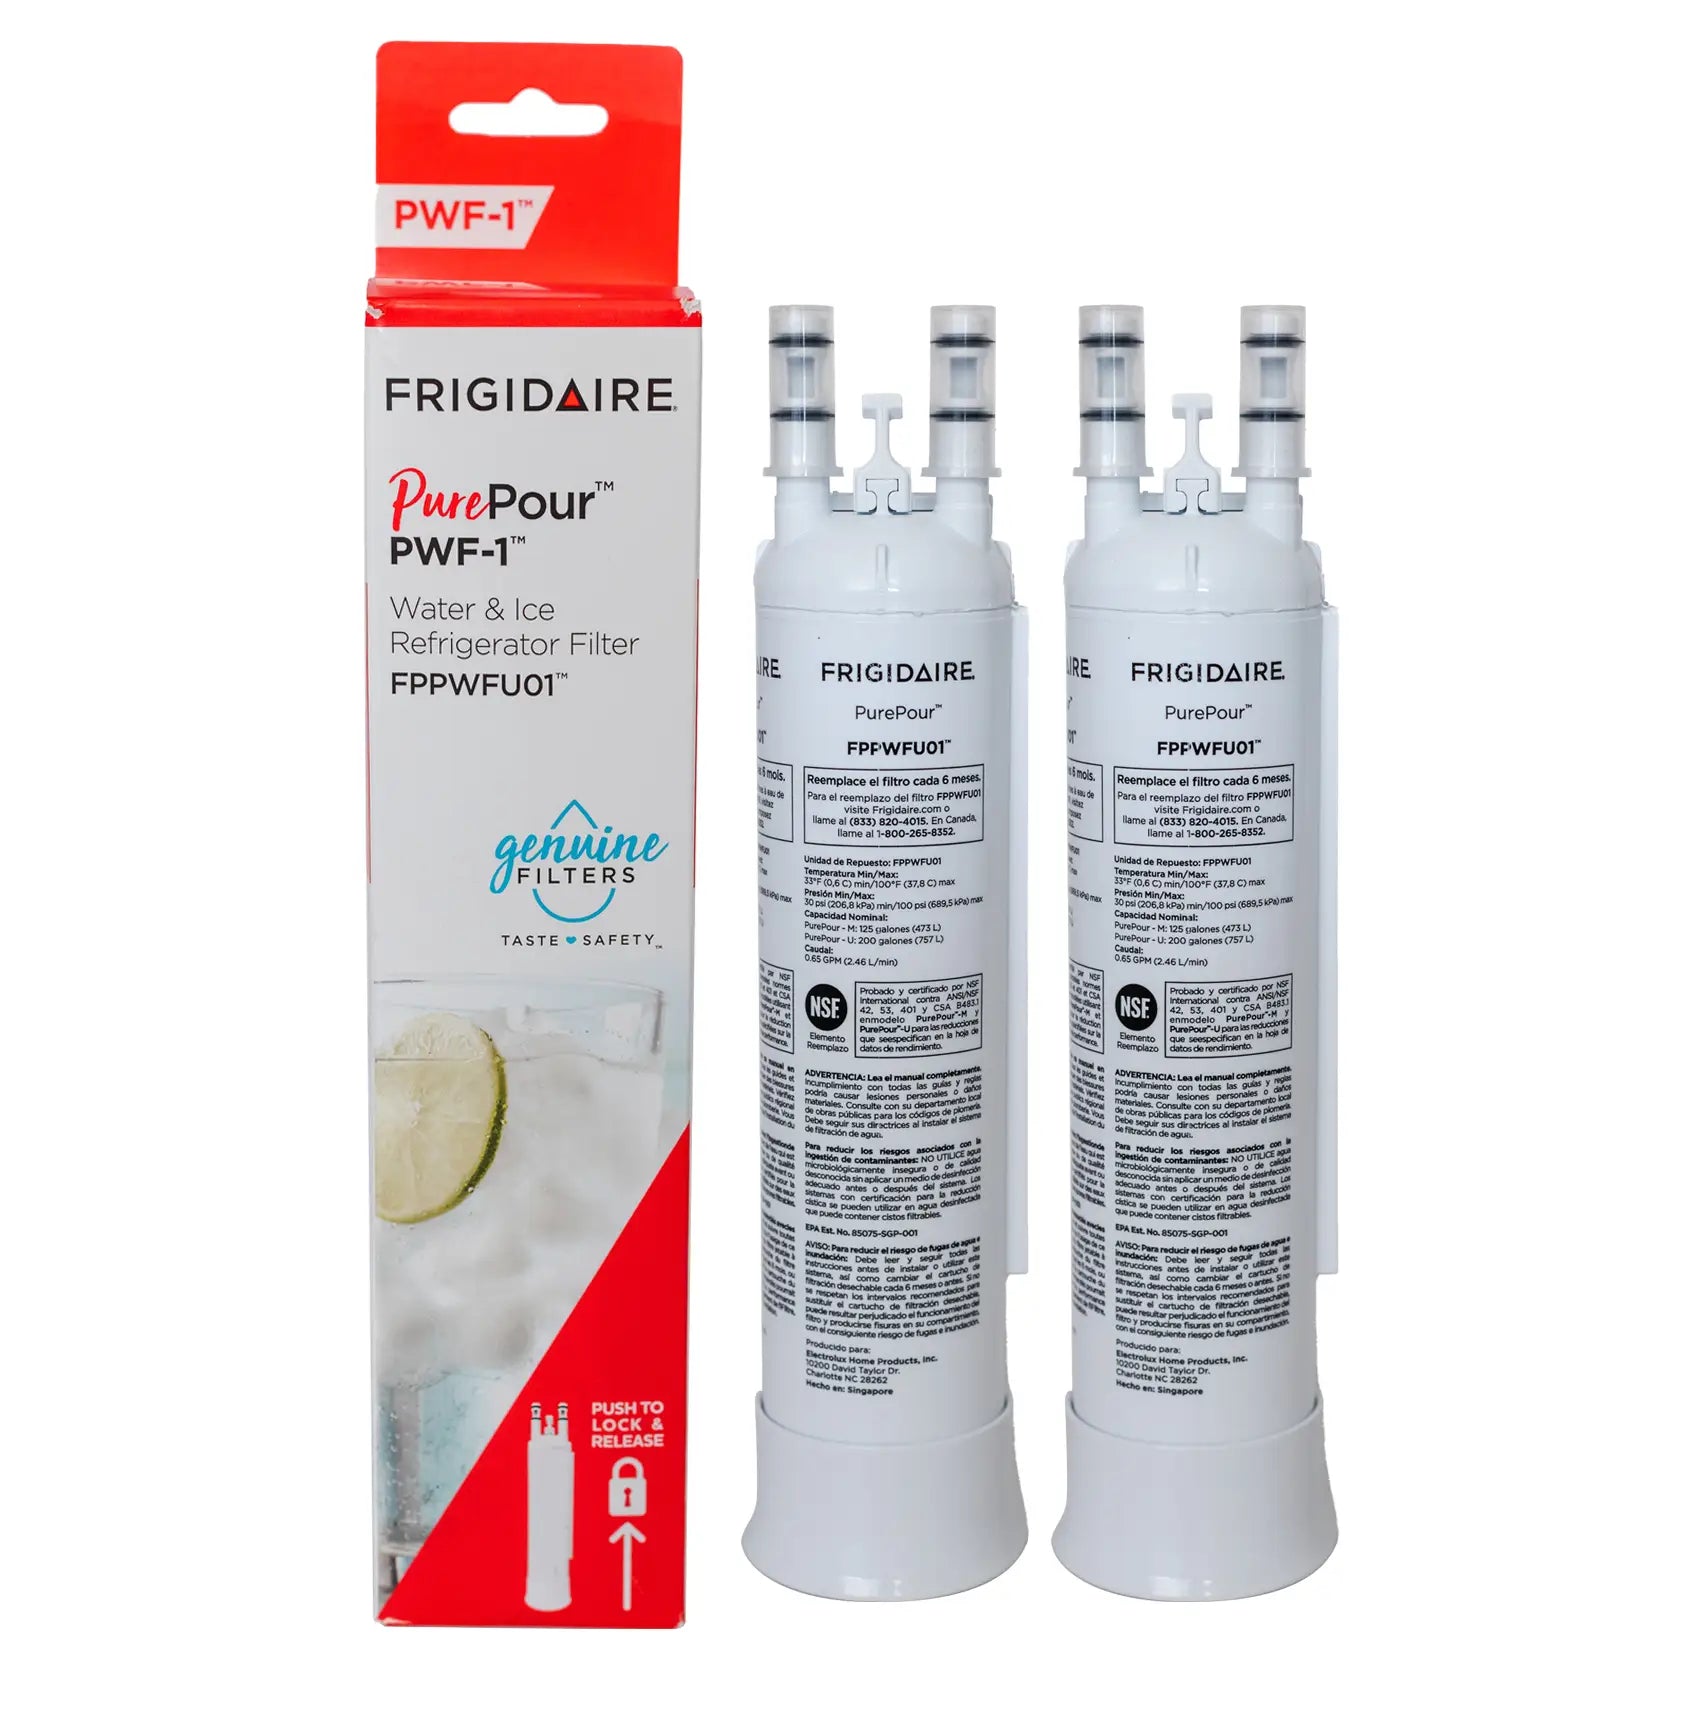 FPPWFU01 Frigidaire PurePour PWF-1 Water Filter